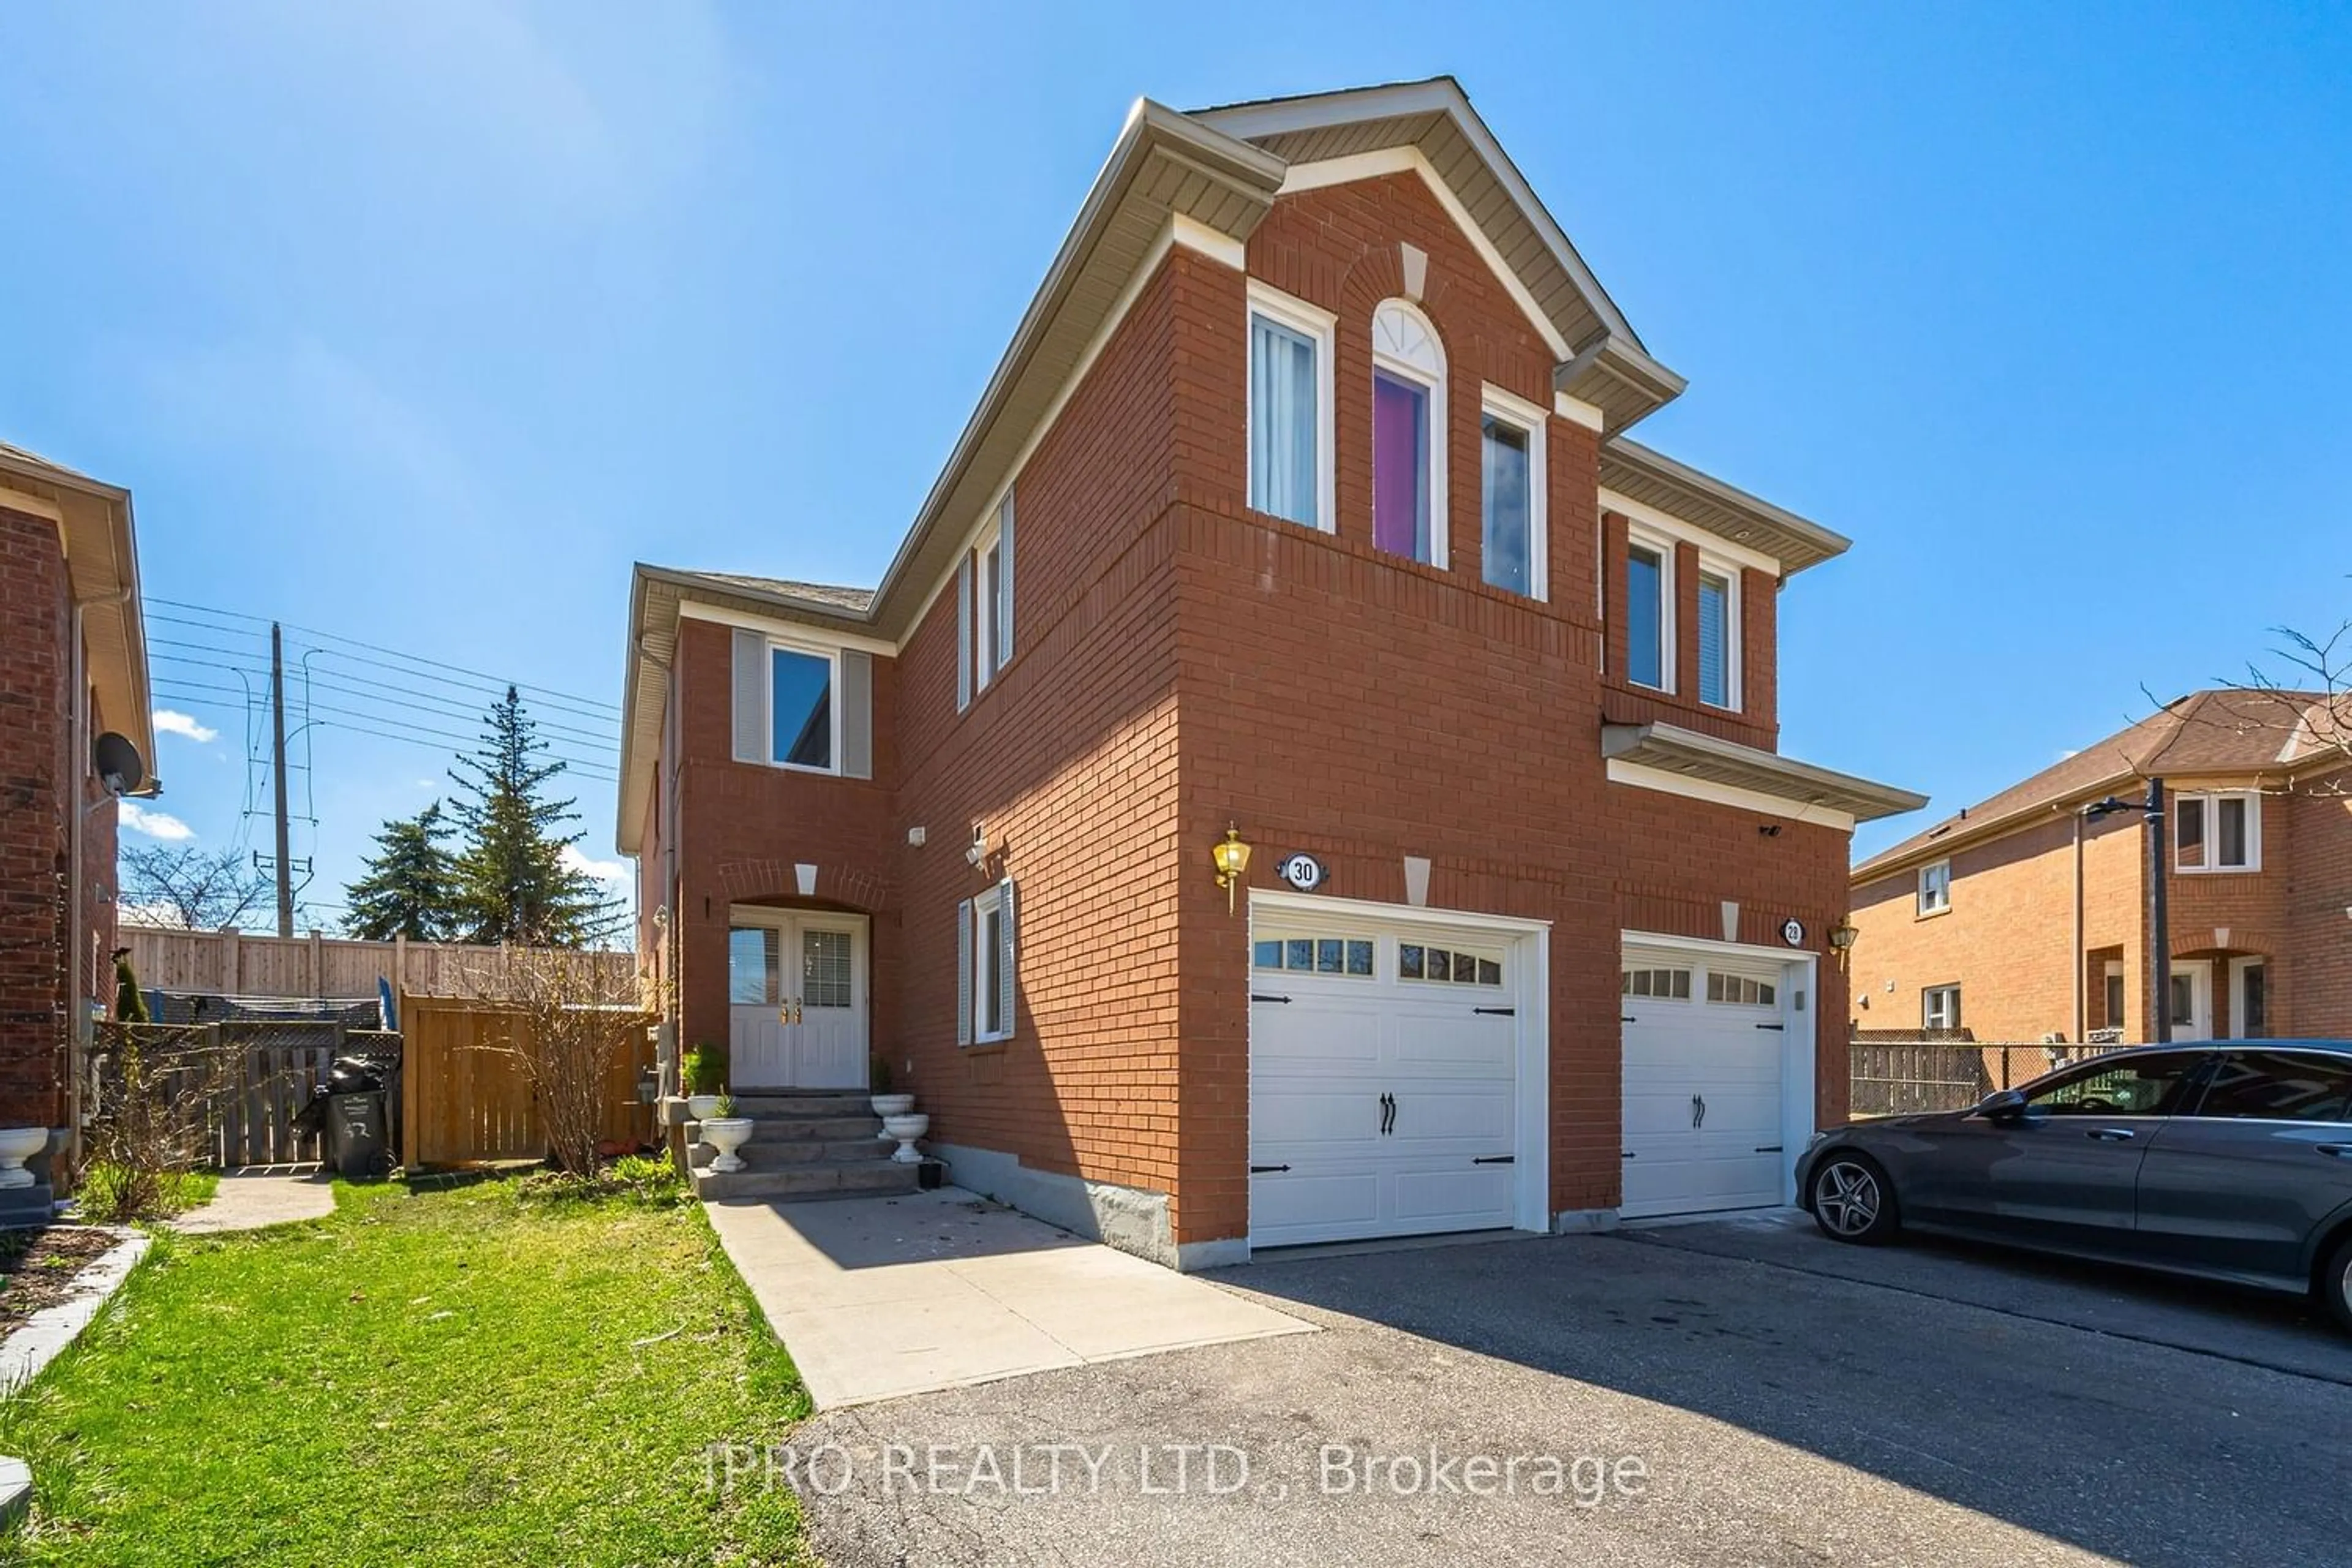 Home with brick exterior material for 30 Mount Ranier Cres, Brampton Ontario L6R 2K9